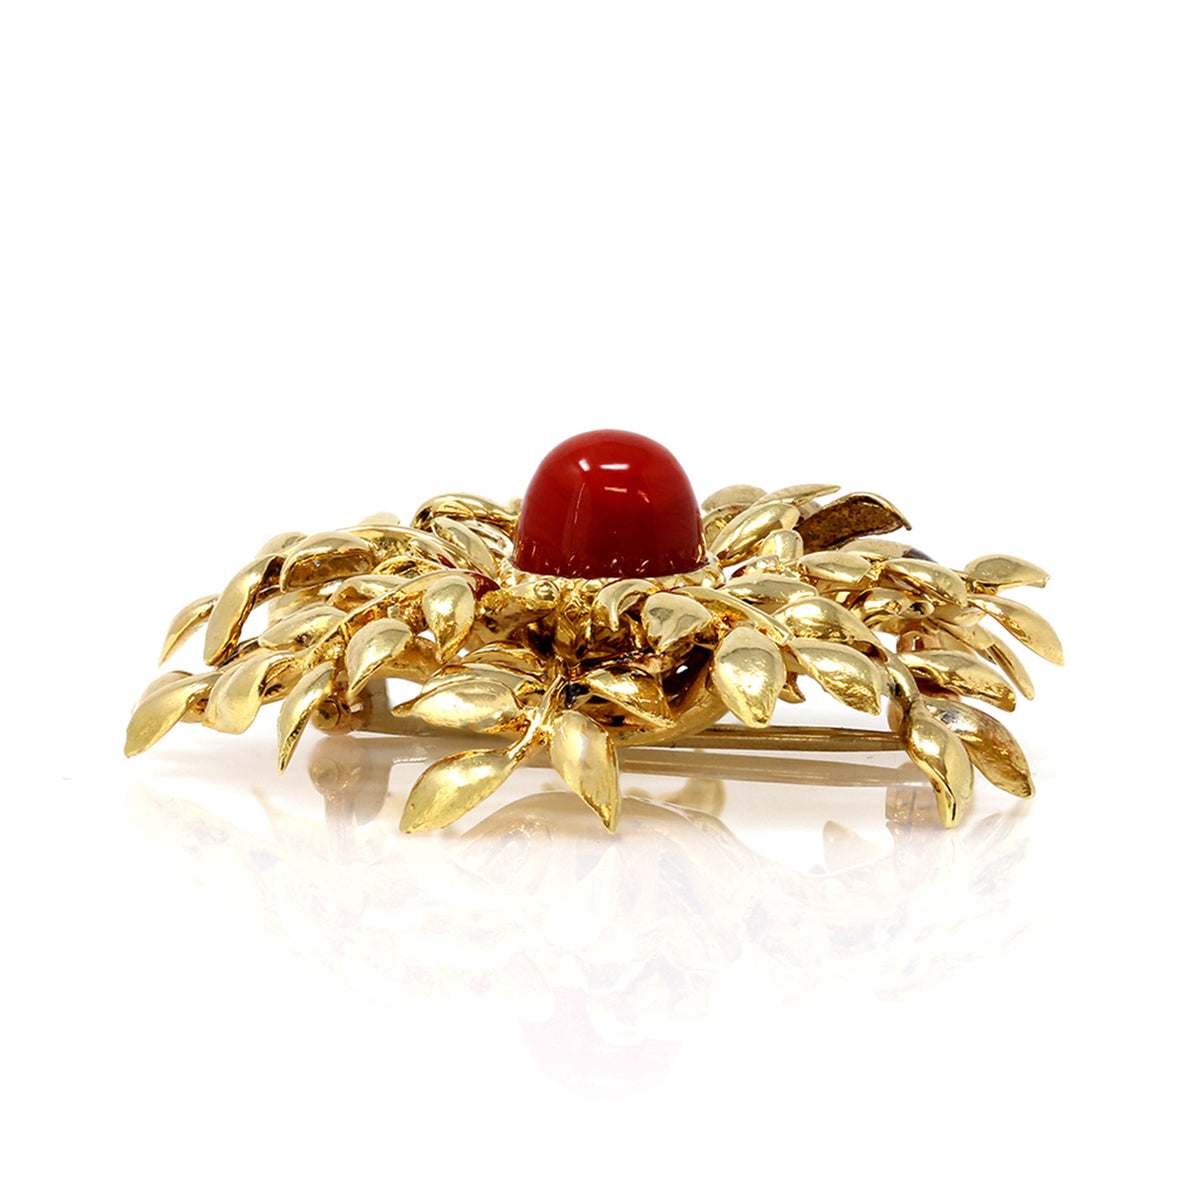 Tiffany &amp; Co. 18 Karat Red Coral and Yellow Gold Brooch side view